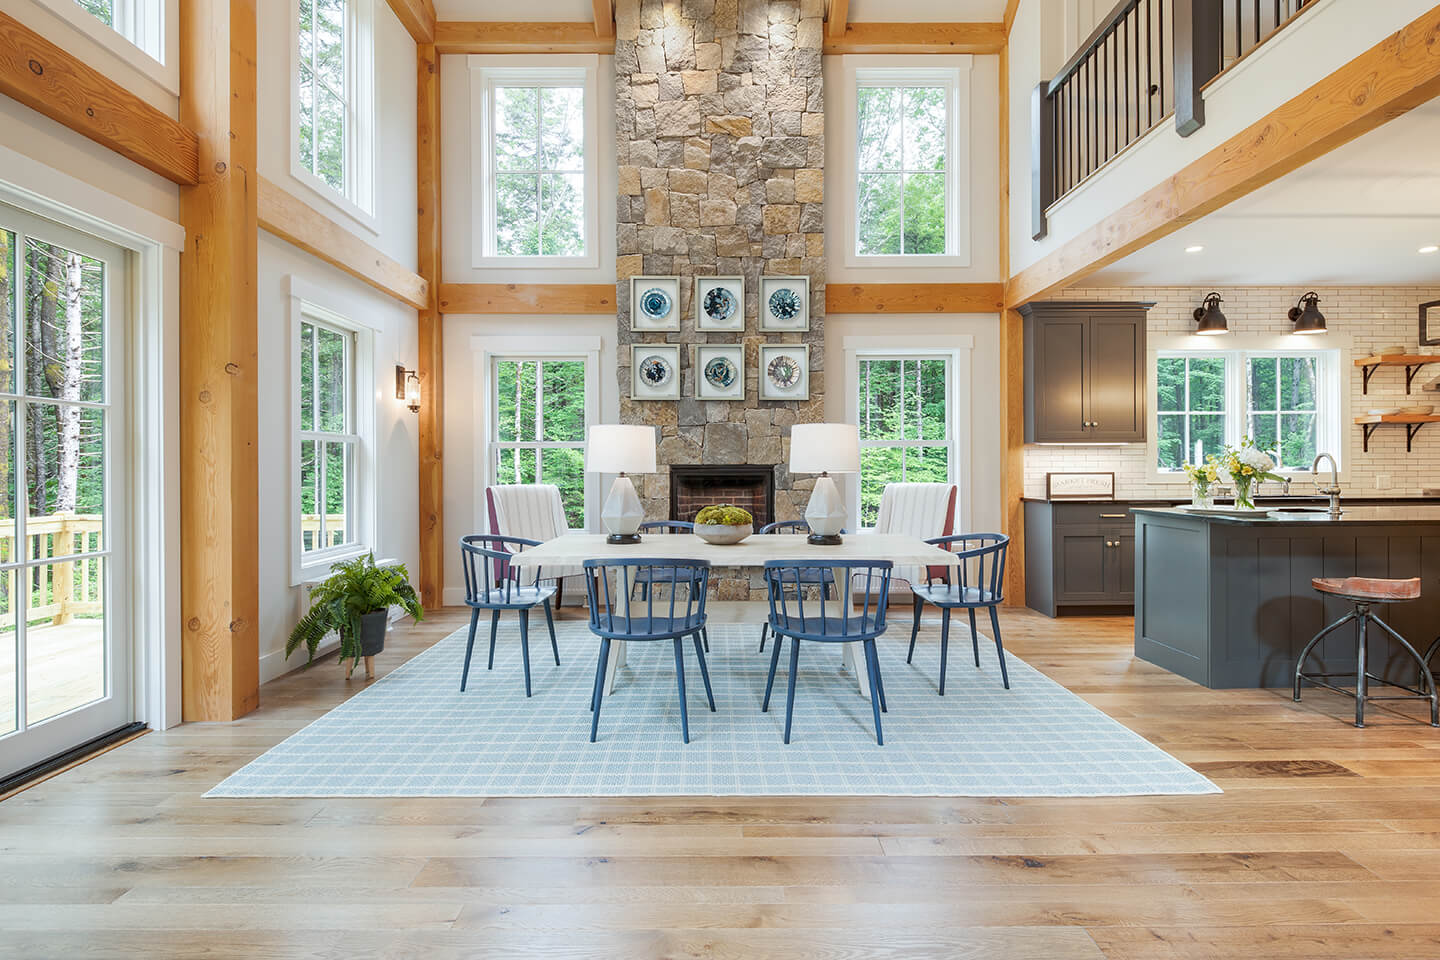 Open concept living room and kitchen in a farmhouse cottage-style home.